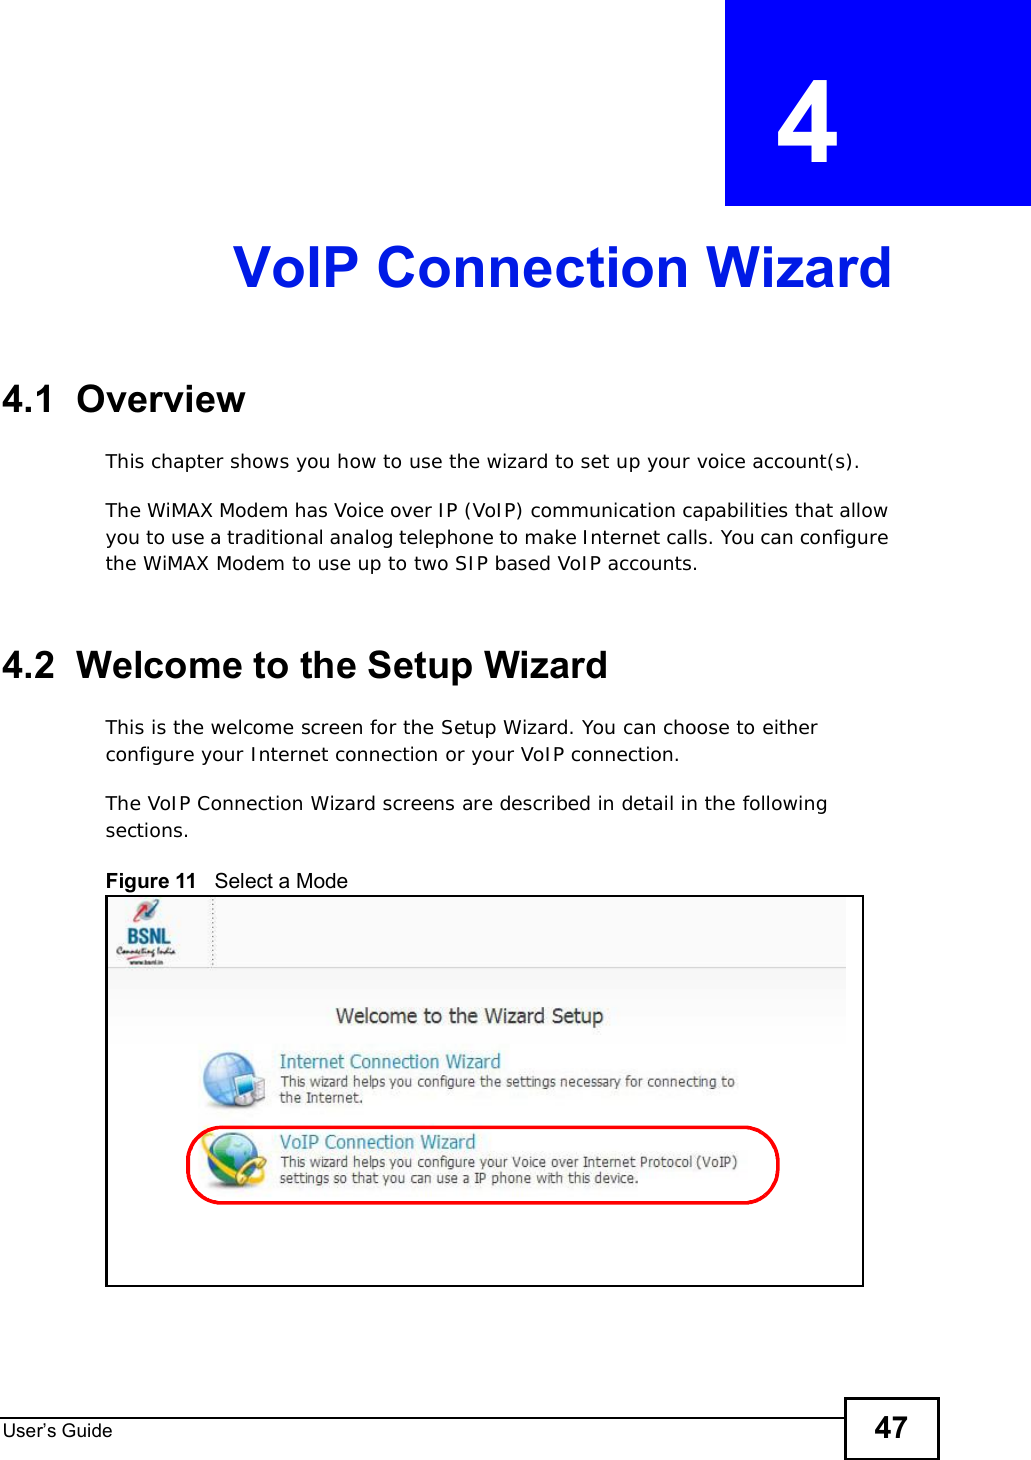 User s Guide 47CHAPTER  4 VoIP Connection Wizard4.1  OverviewThis chapter shows you how to use the wizard to set up your voice account(s).The WiMAX Modem has Voice over IP (VoIP) communication capabilities that allow you to use a traditional analog telephone to make Internet calls. You can configure the WiMAX Modem to use up to two SIP based VoIP accounts.4.2  Welcome to the Setup WizardThis is the welcome screen for the Setup Wizard. You can choose to either configure your Internet connection or your VoIP connection.The VoIP Connection Wizard screens are described in detail in the following sections.Figure 11   Select a Mode